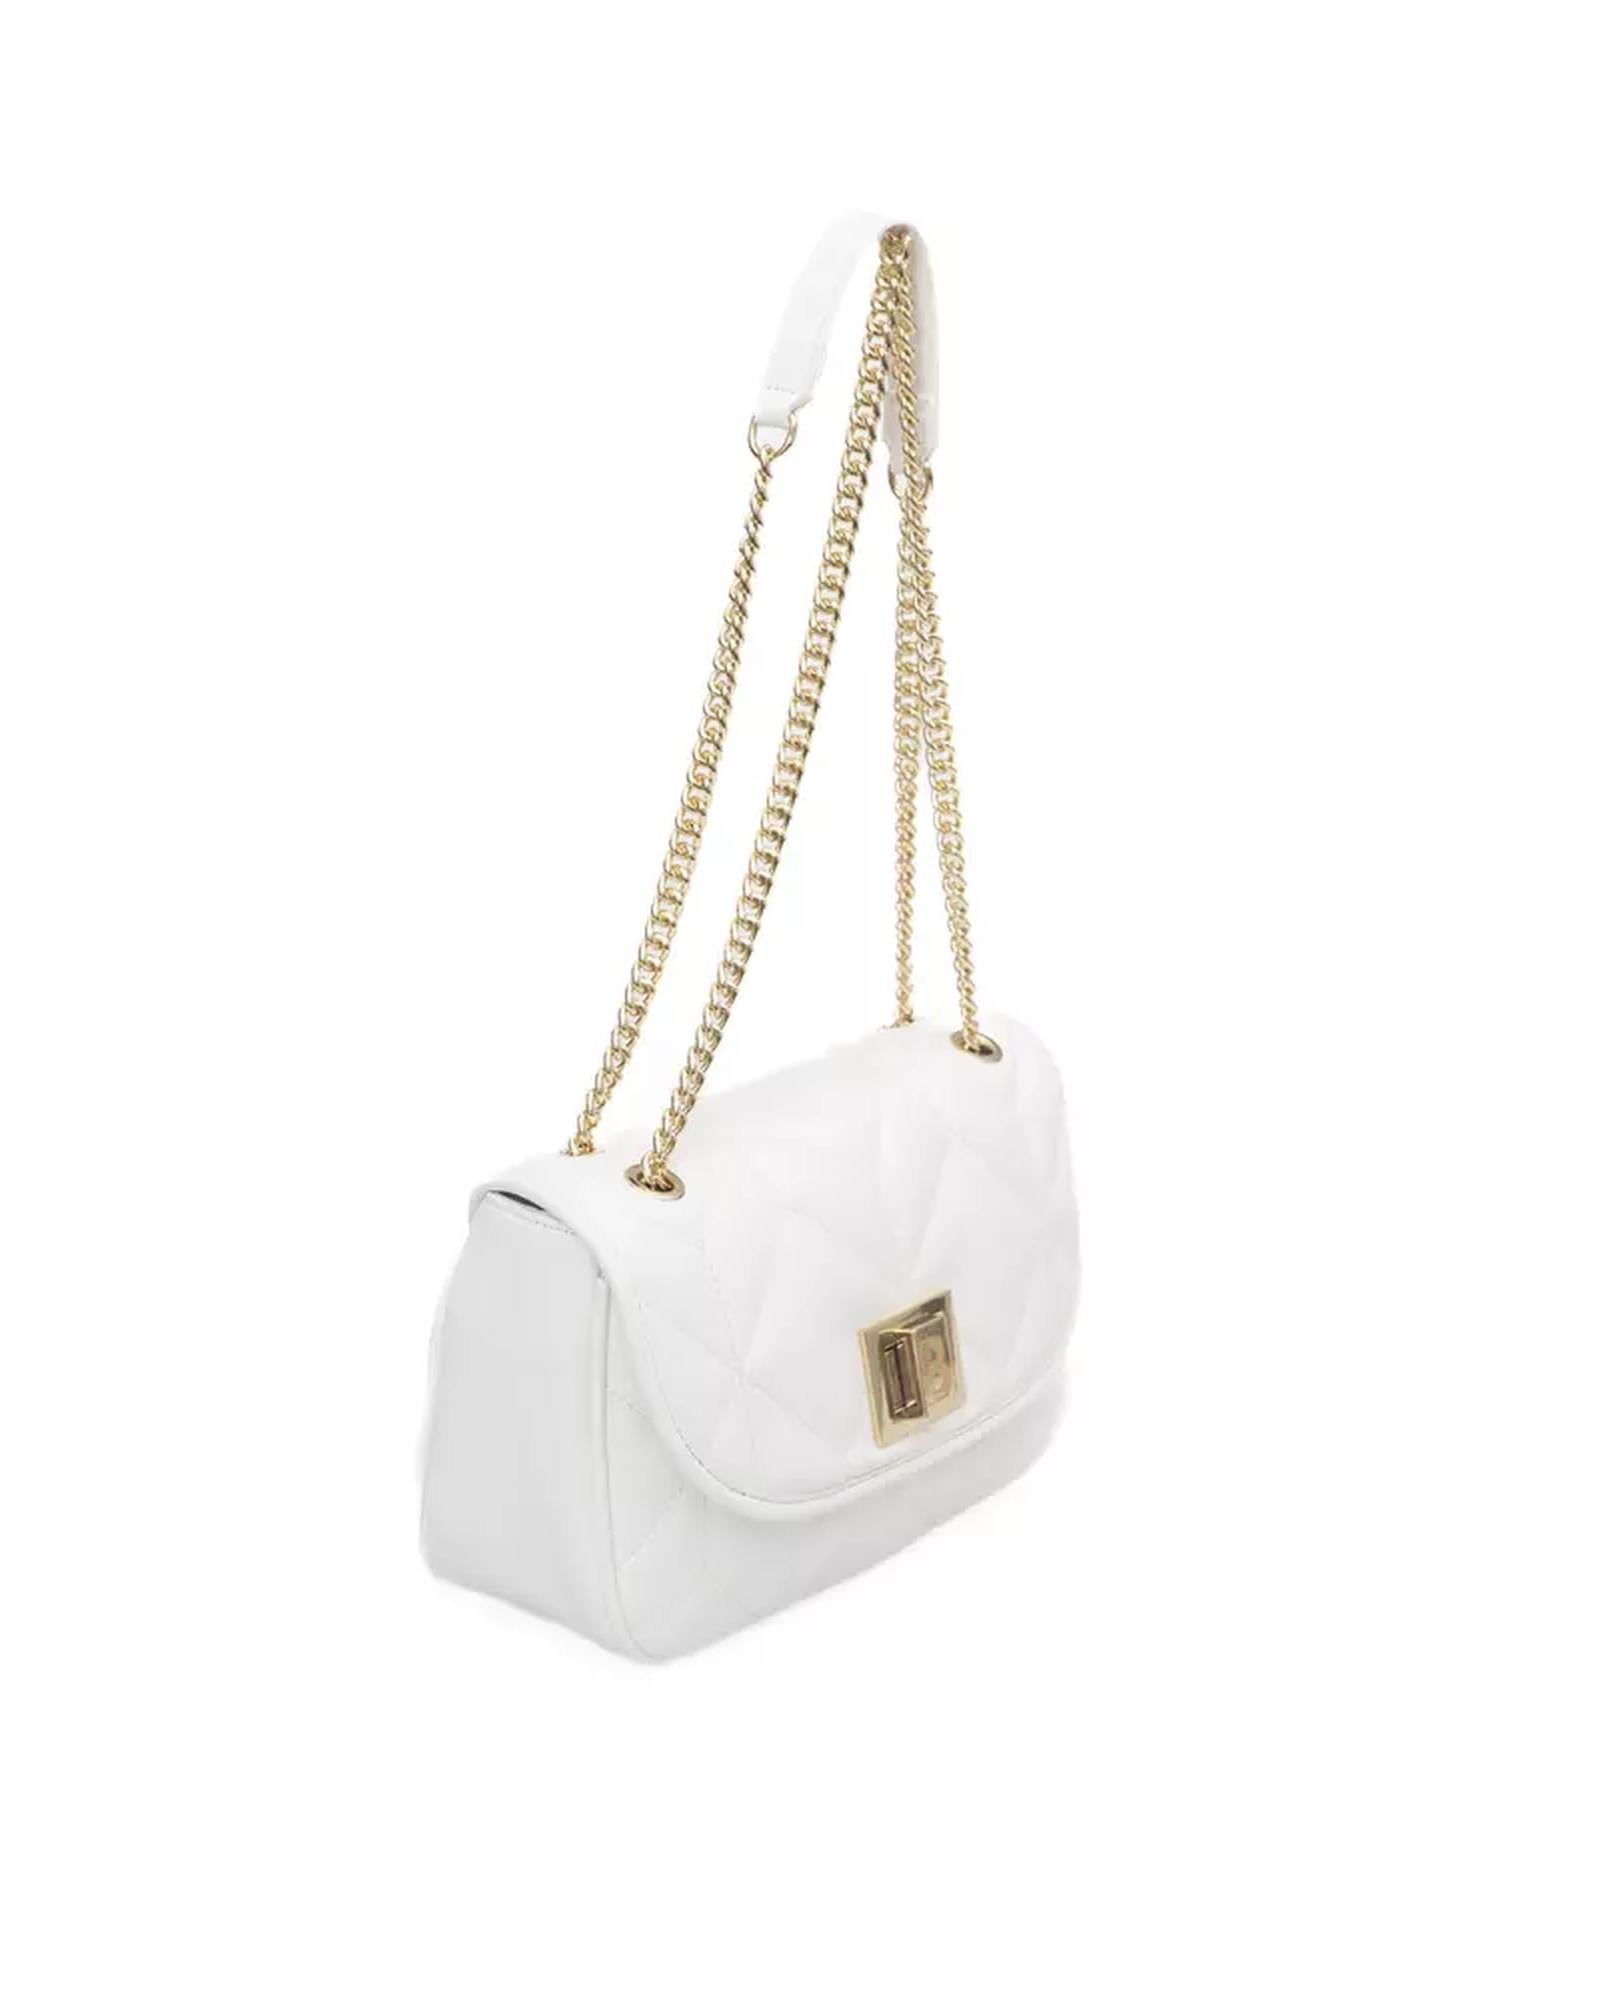 Flap Closure Leather Shoulder Bag with Internal Compartments and Golden Details One Size Women